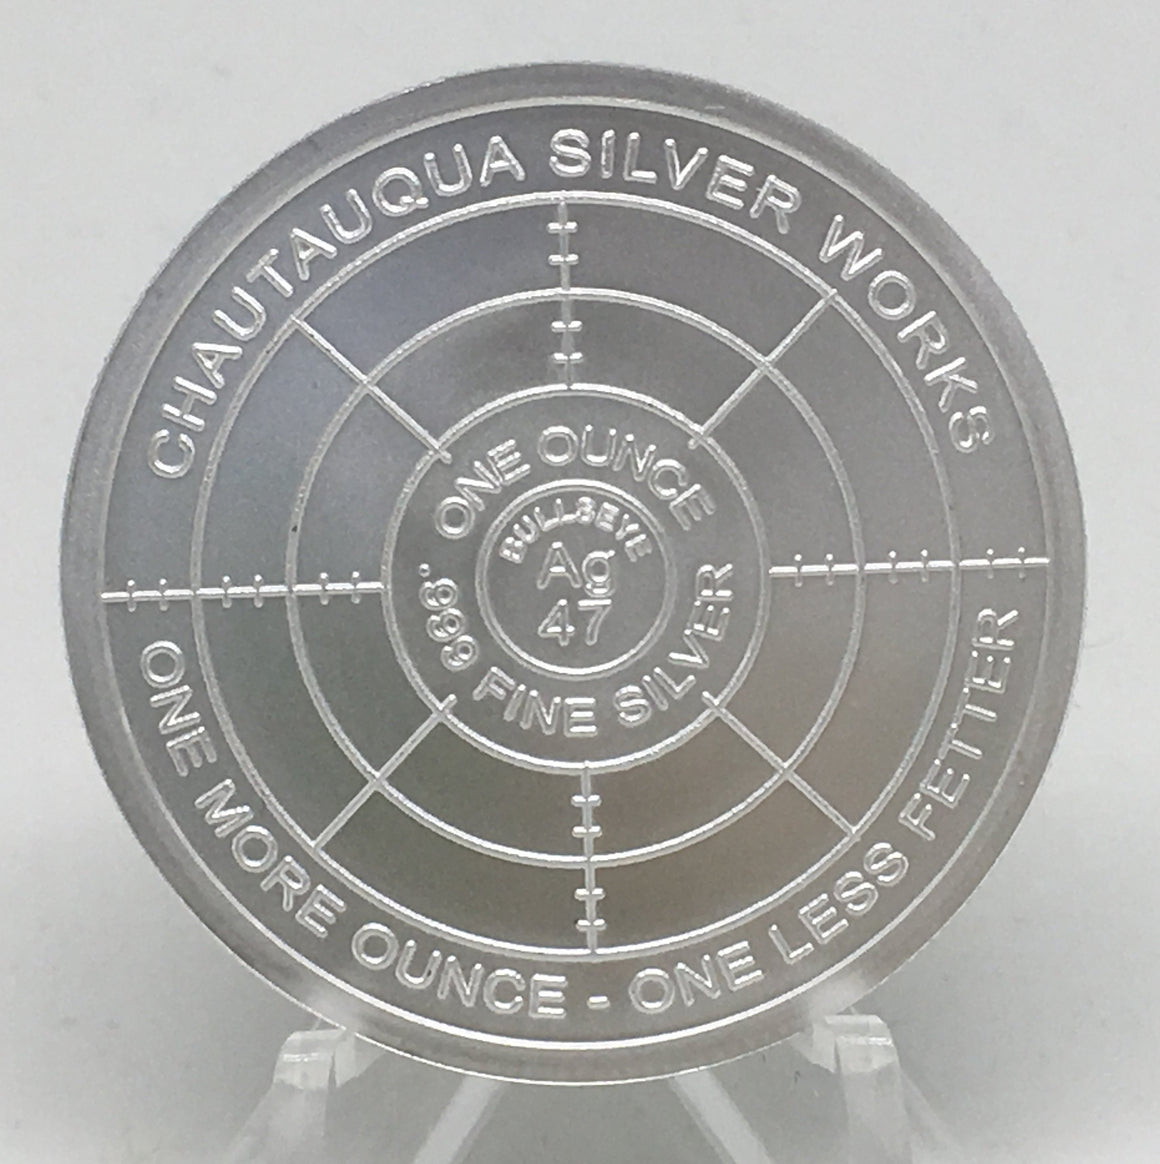 Cryptic Silver Series #5 - Cryptic Facade, BU Finish by Chautauqua Silver Works, 1oz .999 Silver Round.